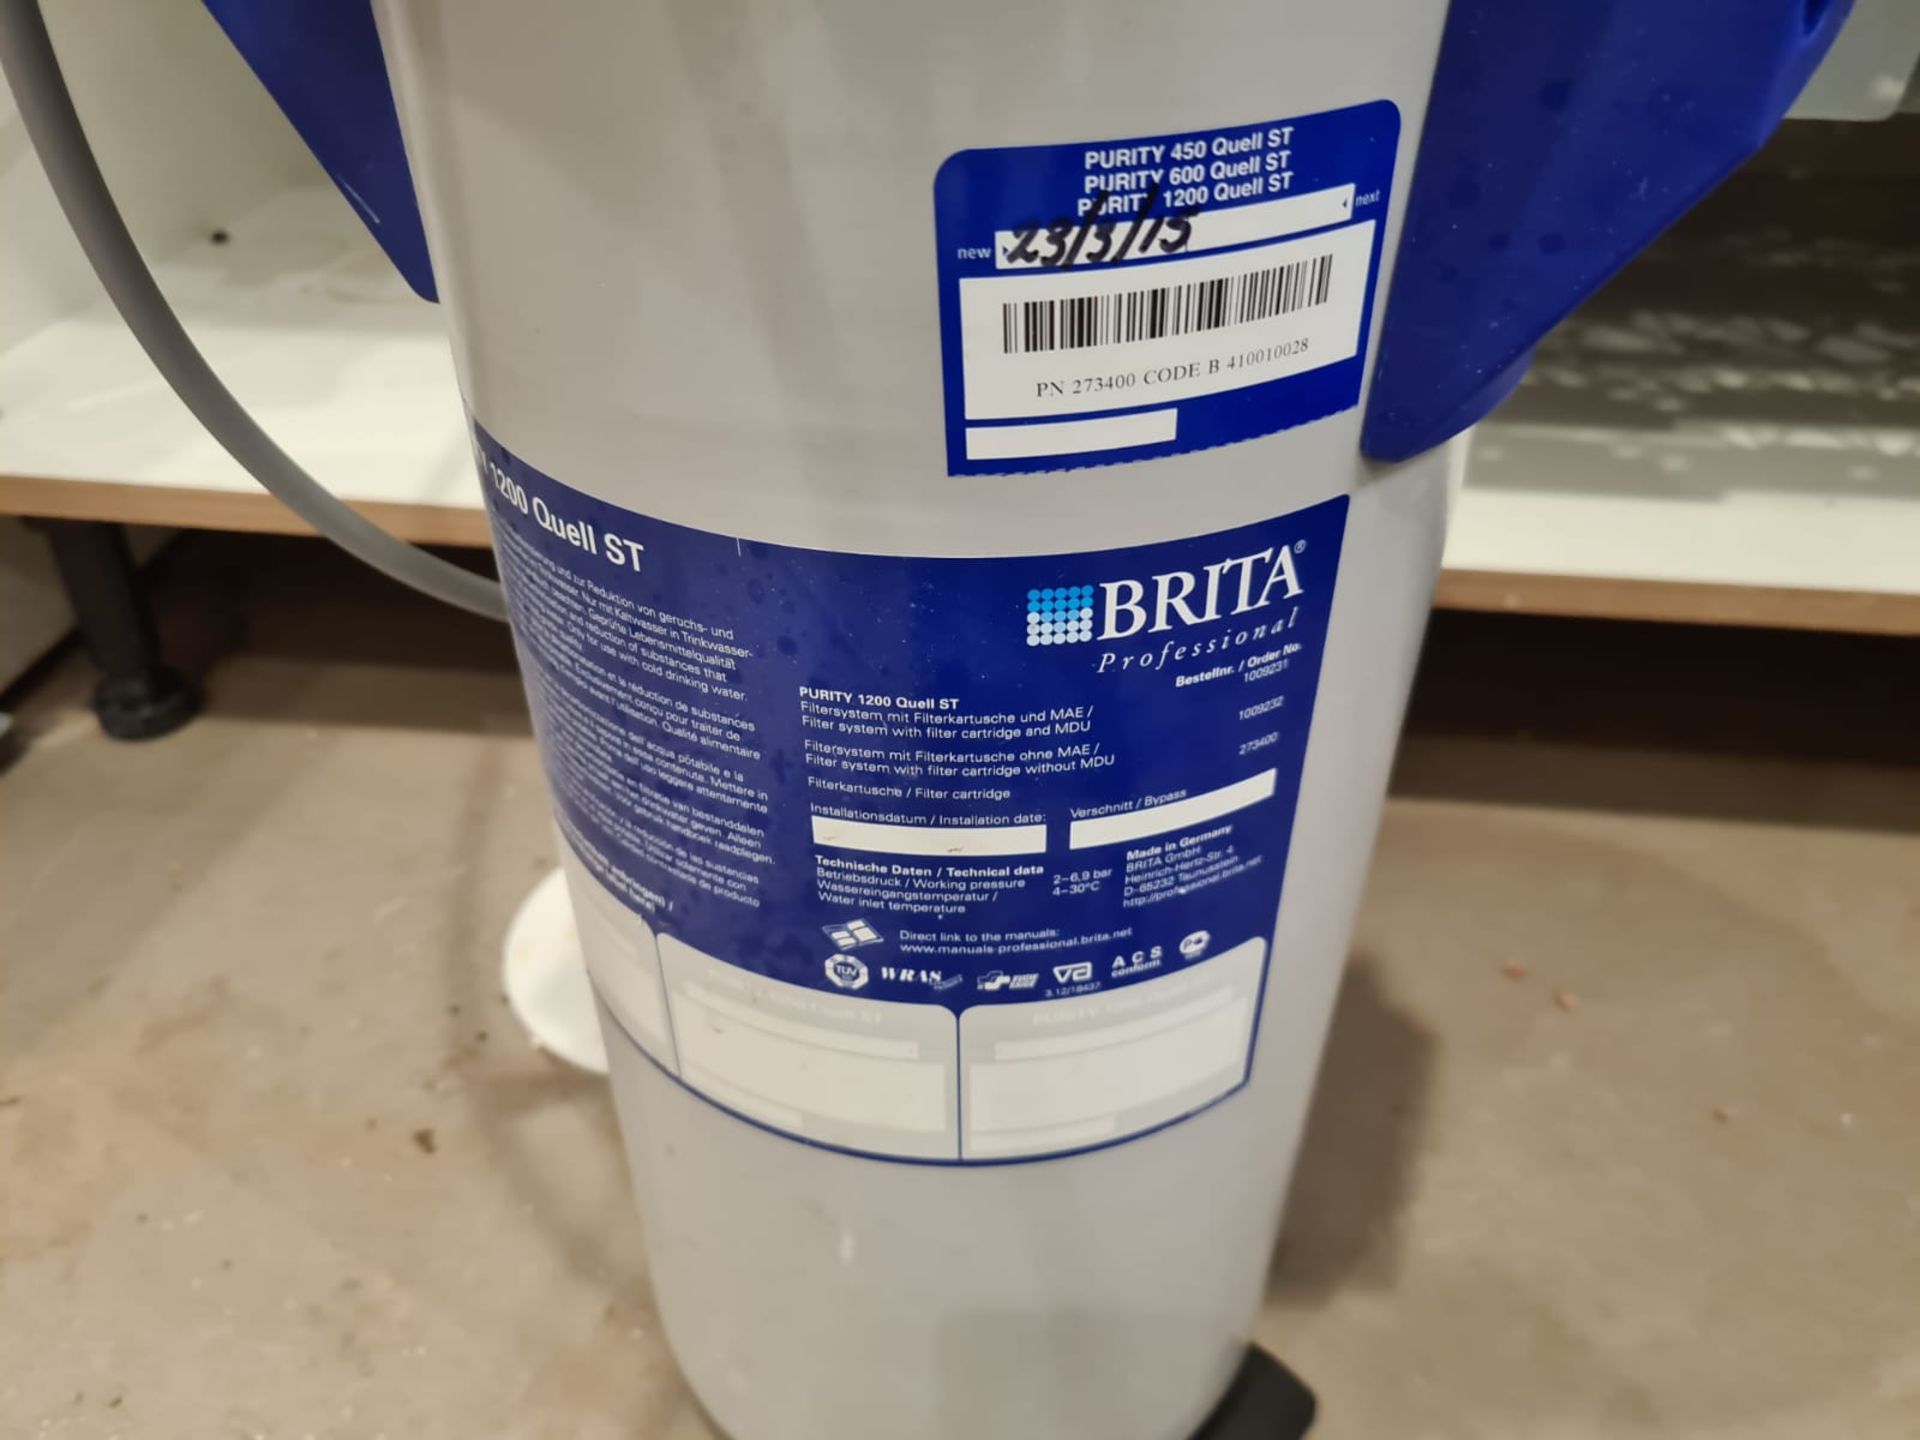 Brita Purity 1200 Steam Filter System - Image 6 of 6